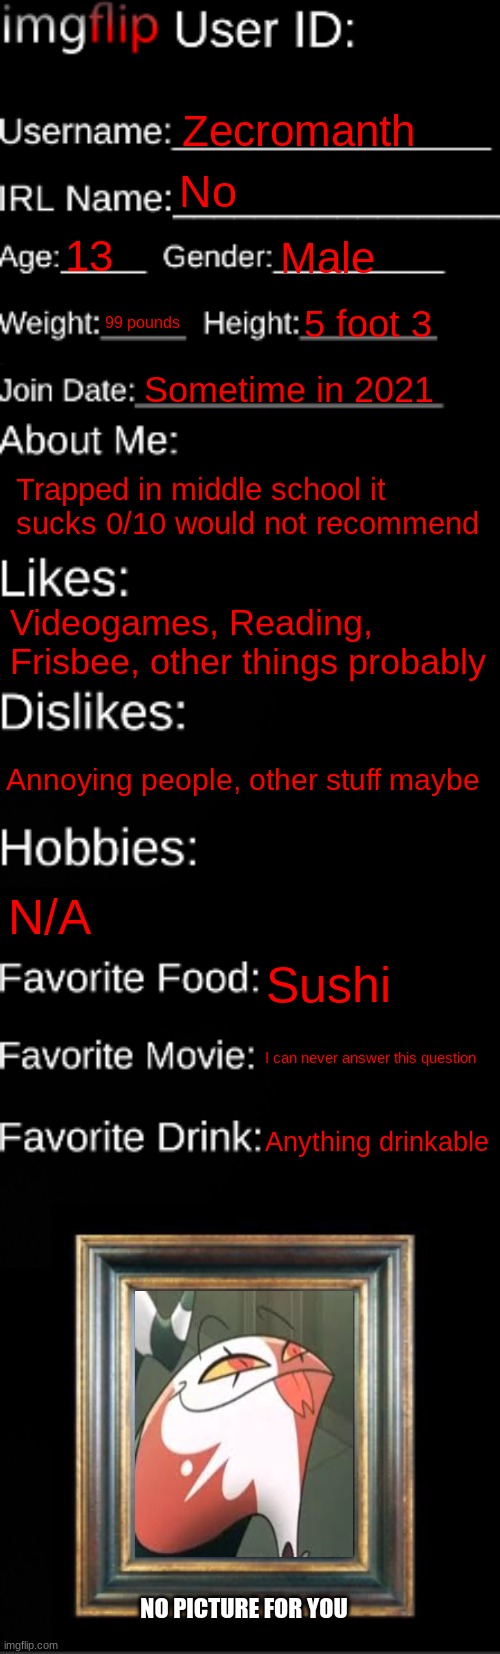 H | Zecromanth; No; 13; Male; 99 pounds; 5 foot 3; Sometime in 2021; Trapped in middle school it sucks 0/10 would not recommend; Videogames, Reading, Frisbee, other things probably; Annoying people, other stuff maybe; N/A; Sushi; I can never answer this question; Anything drinkable; NO PICTURE FOR YOU | image tagged in imgflip id card | made w/ Imgflip meme maker